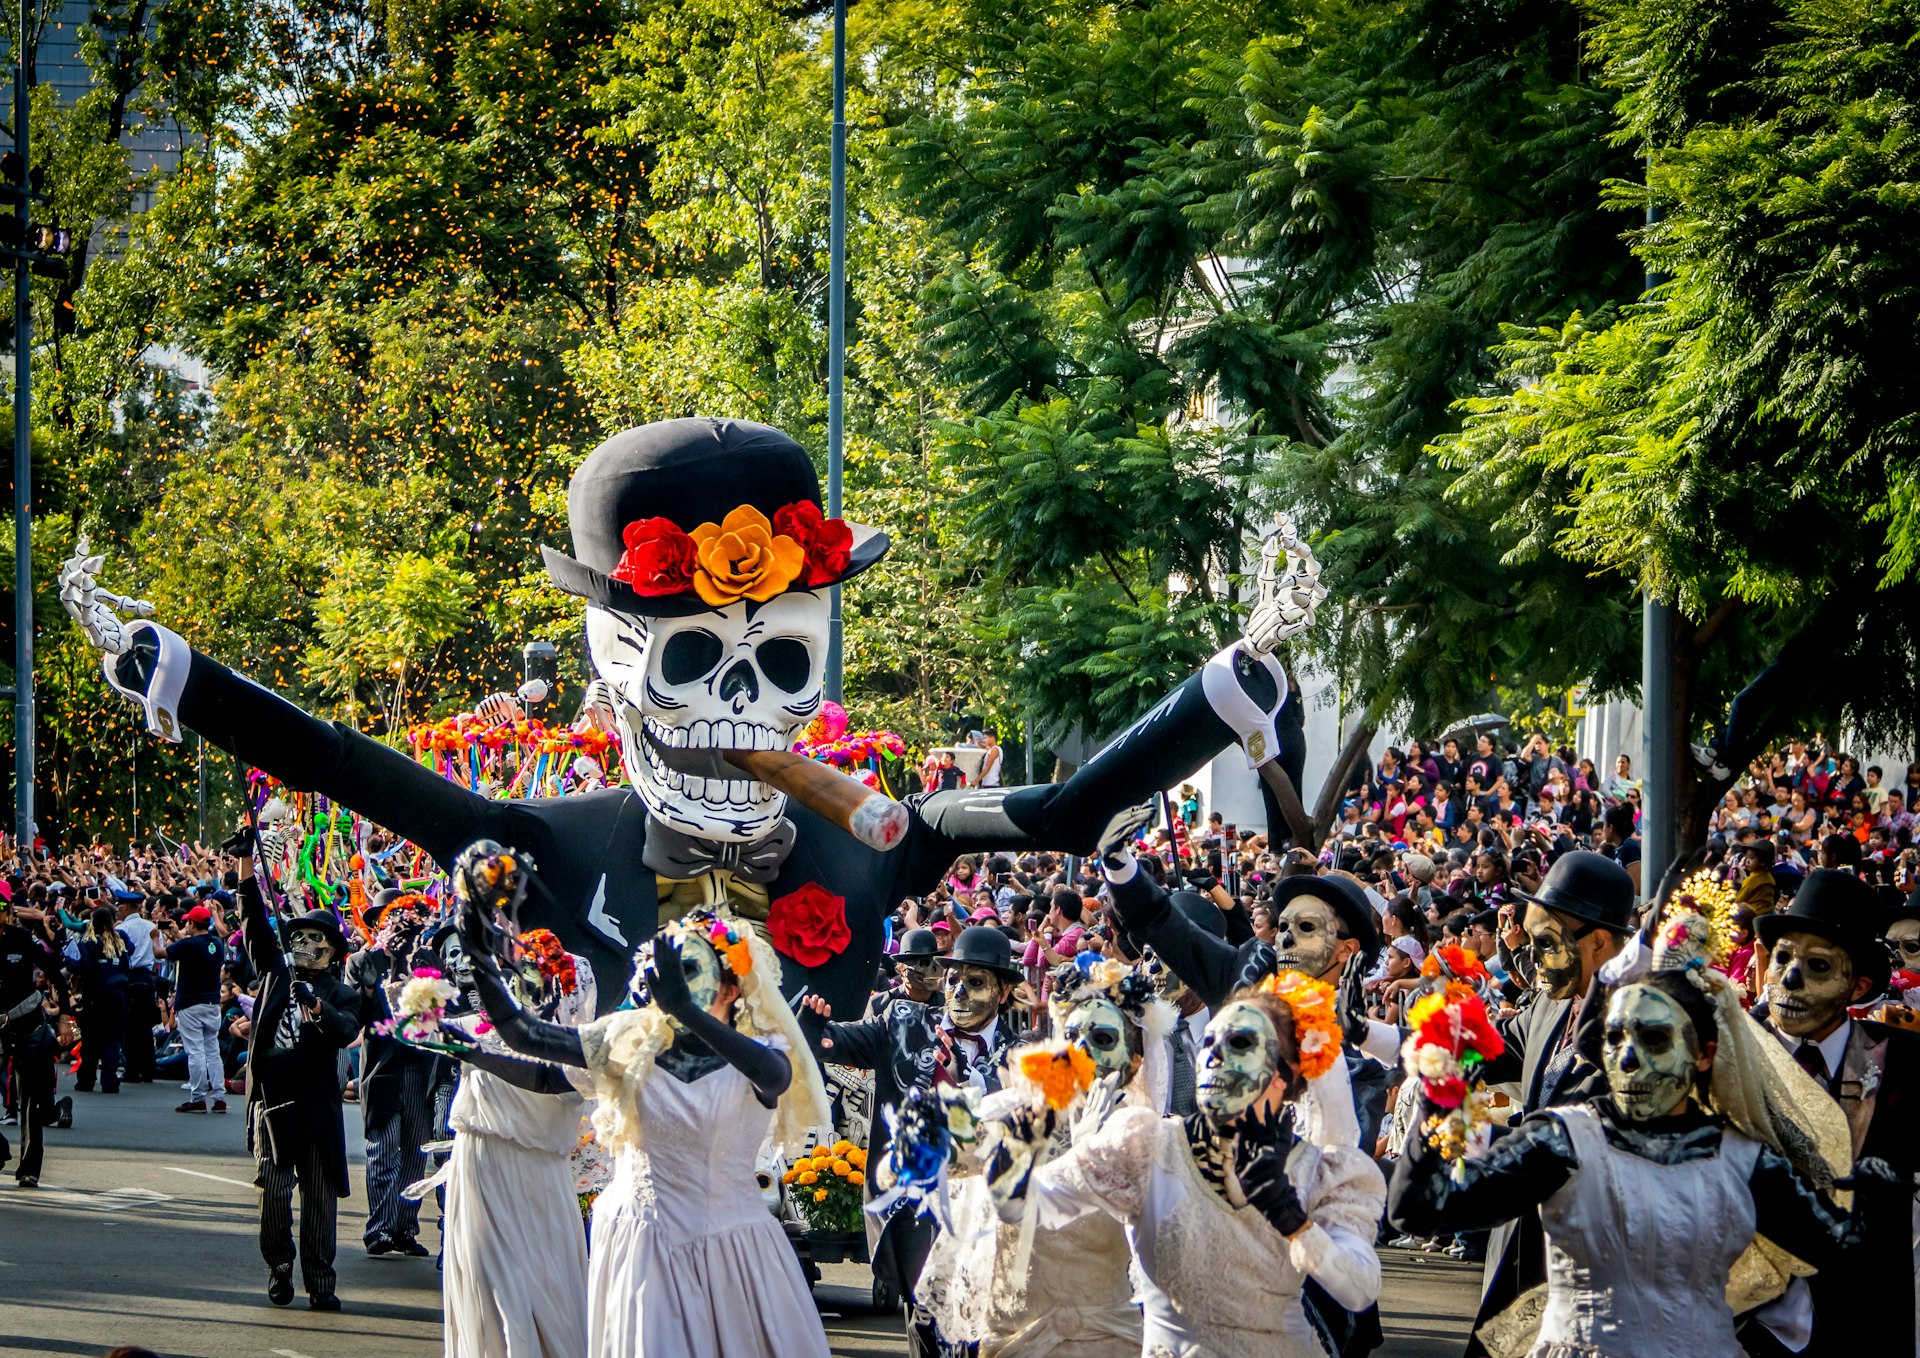 Day of the Dead festival celebrated with skull-shaped floats parading down a street